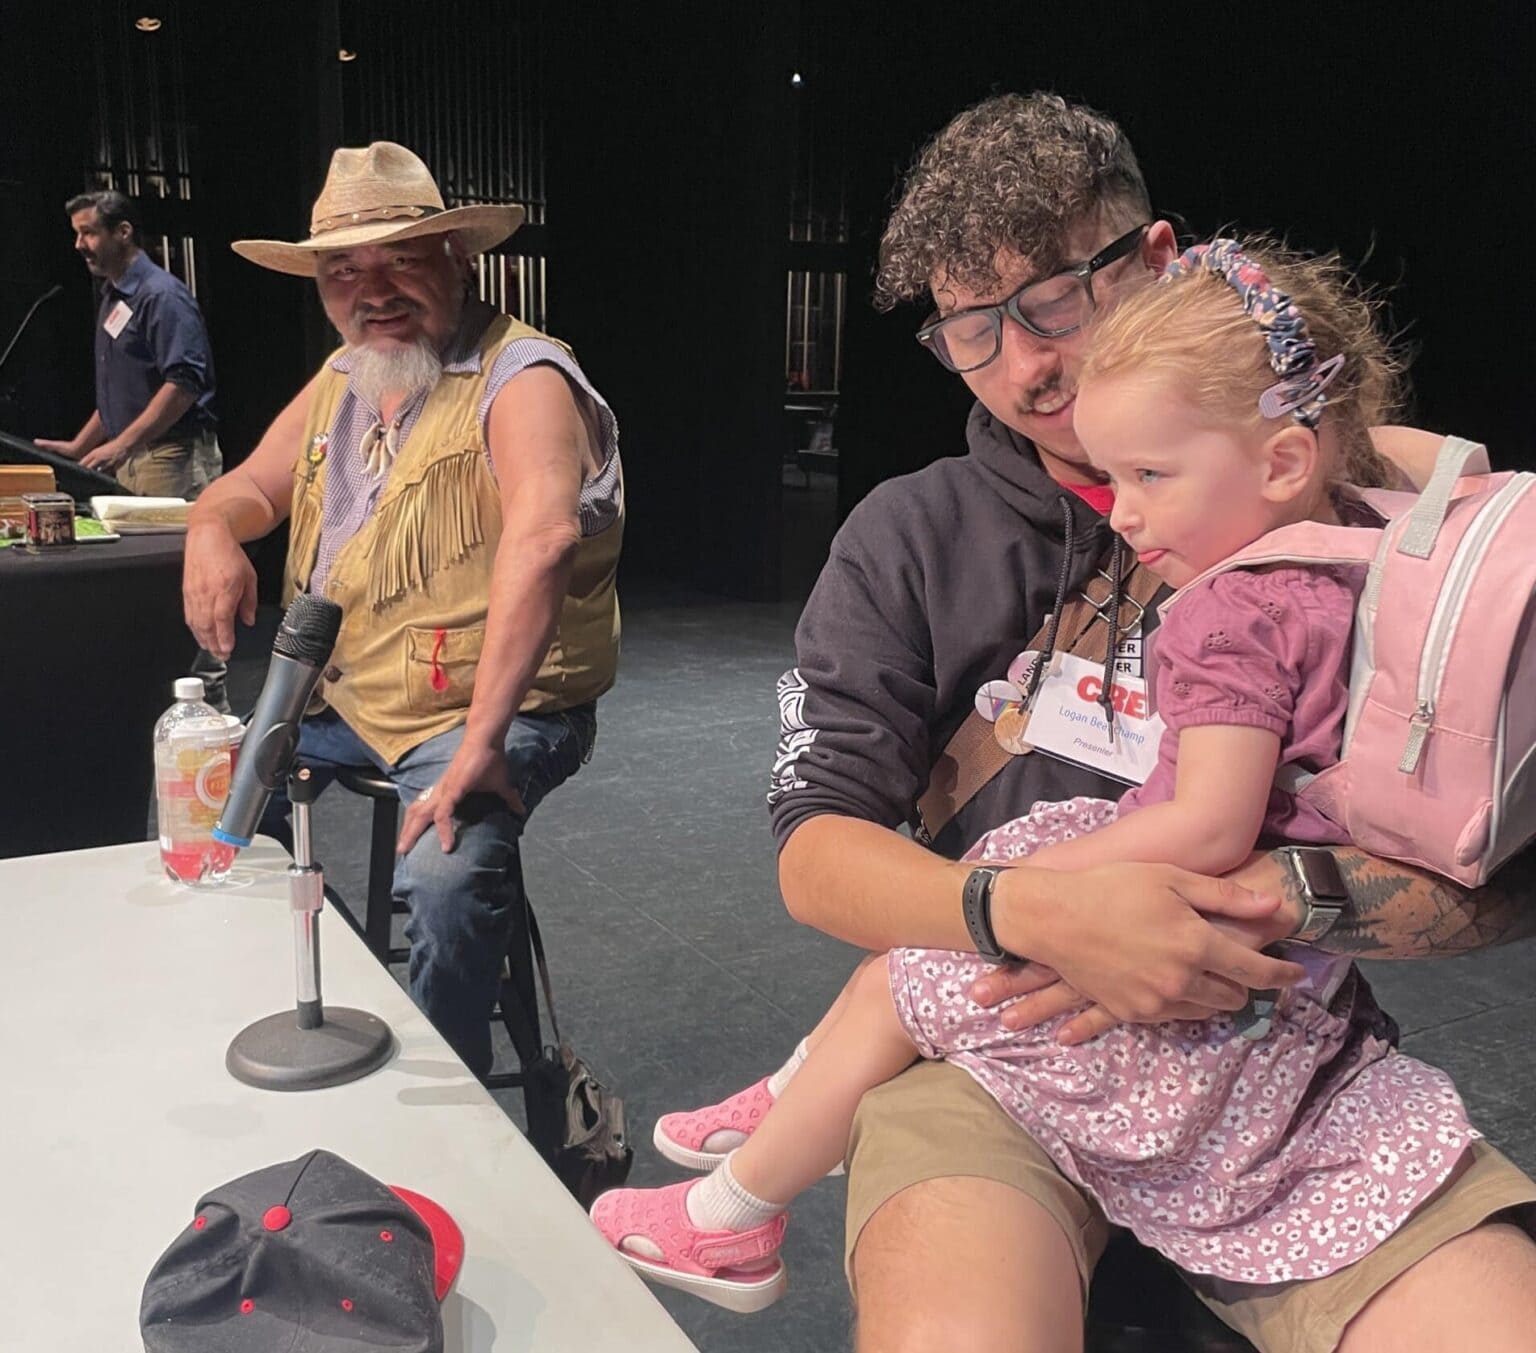 Three people sitting at a table for a panel. One man is wearing a fringe vest and a cowboy hat. The other man wears glasses and a young girl sits on his lap